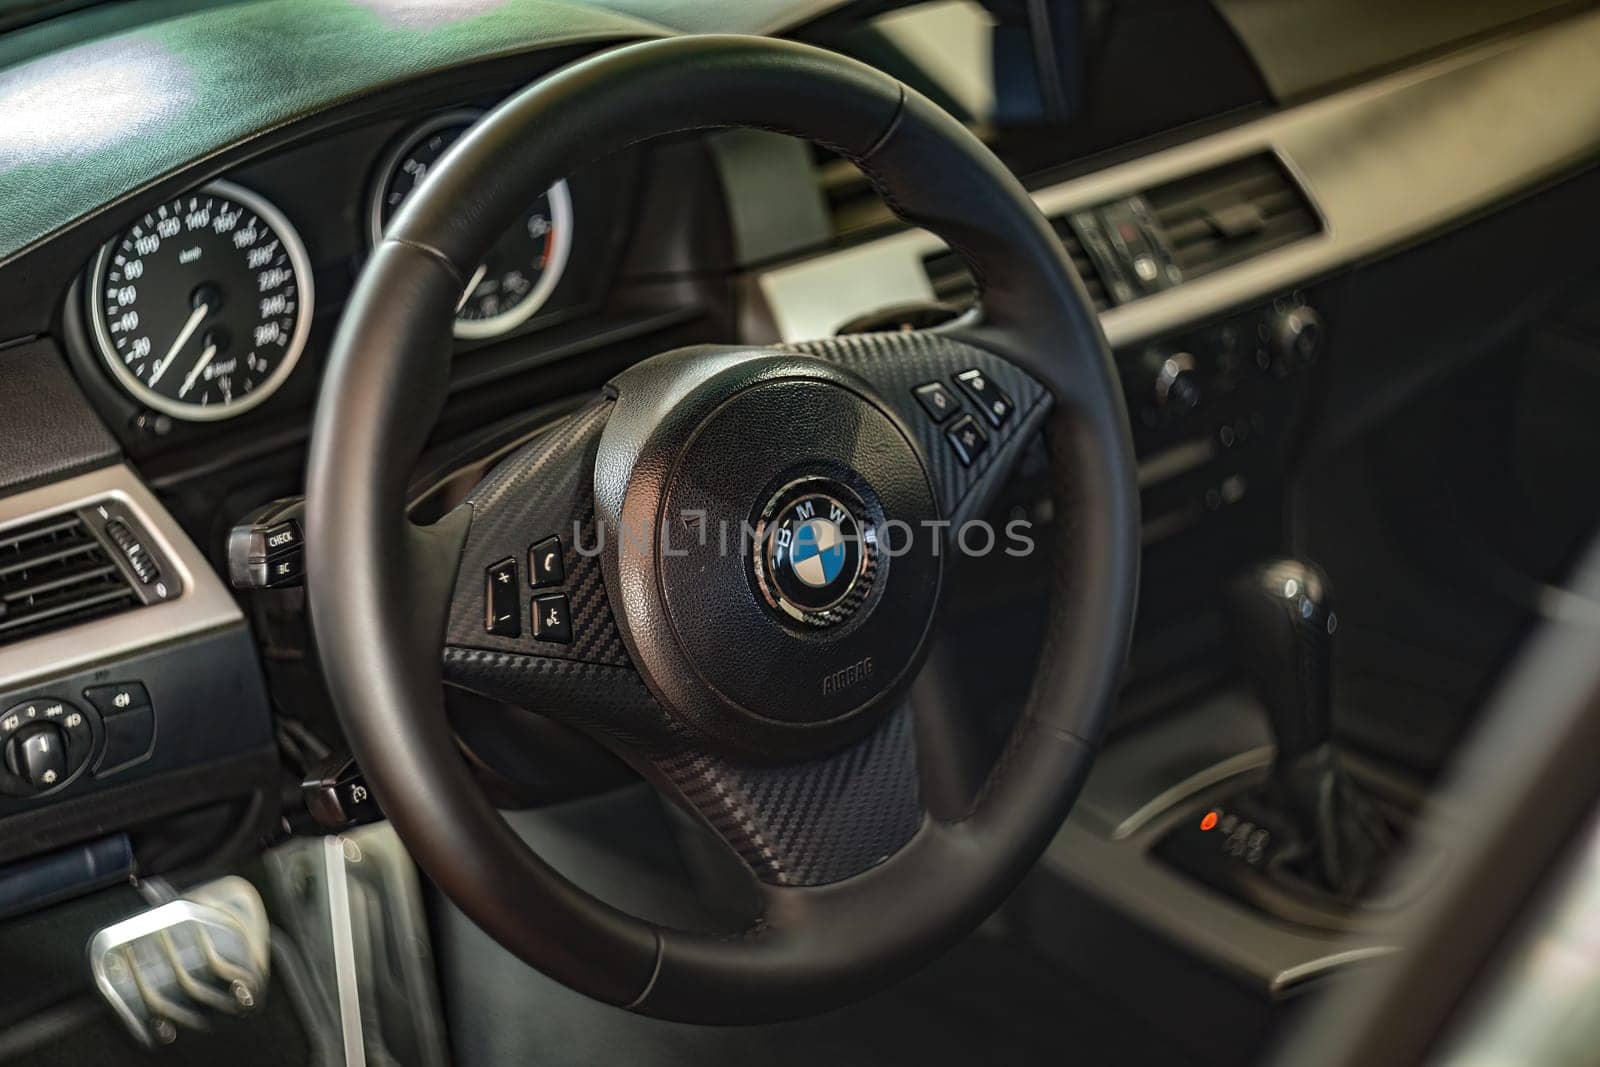 BMW Car Interior with Visible Emblem by pippocarlot